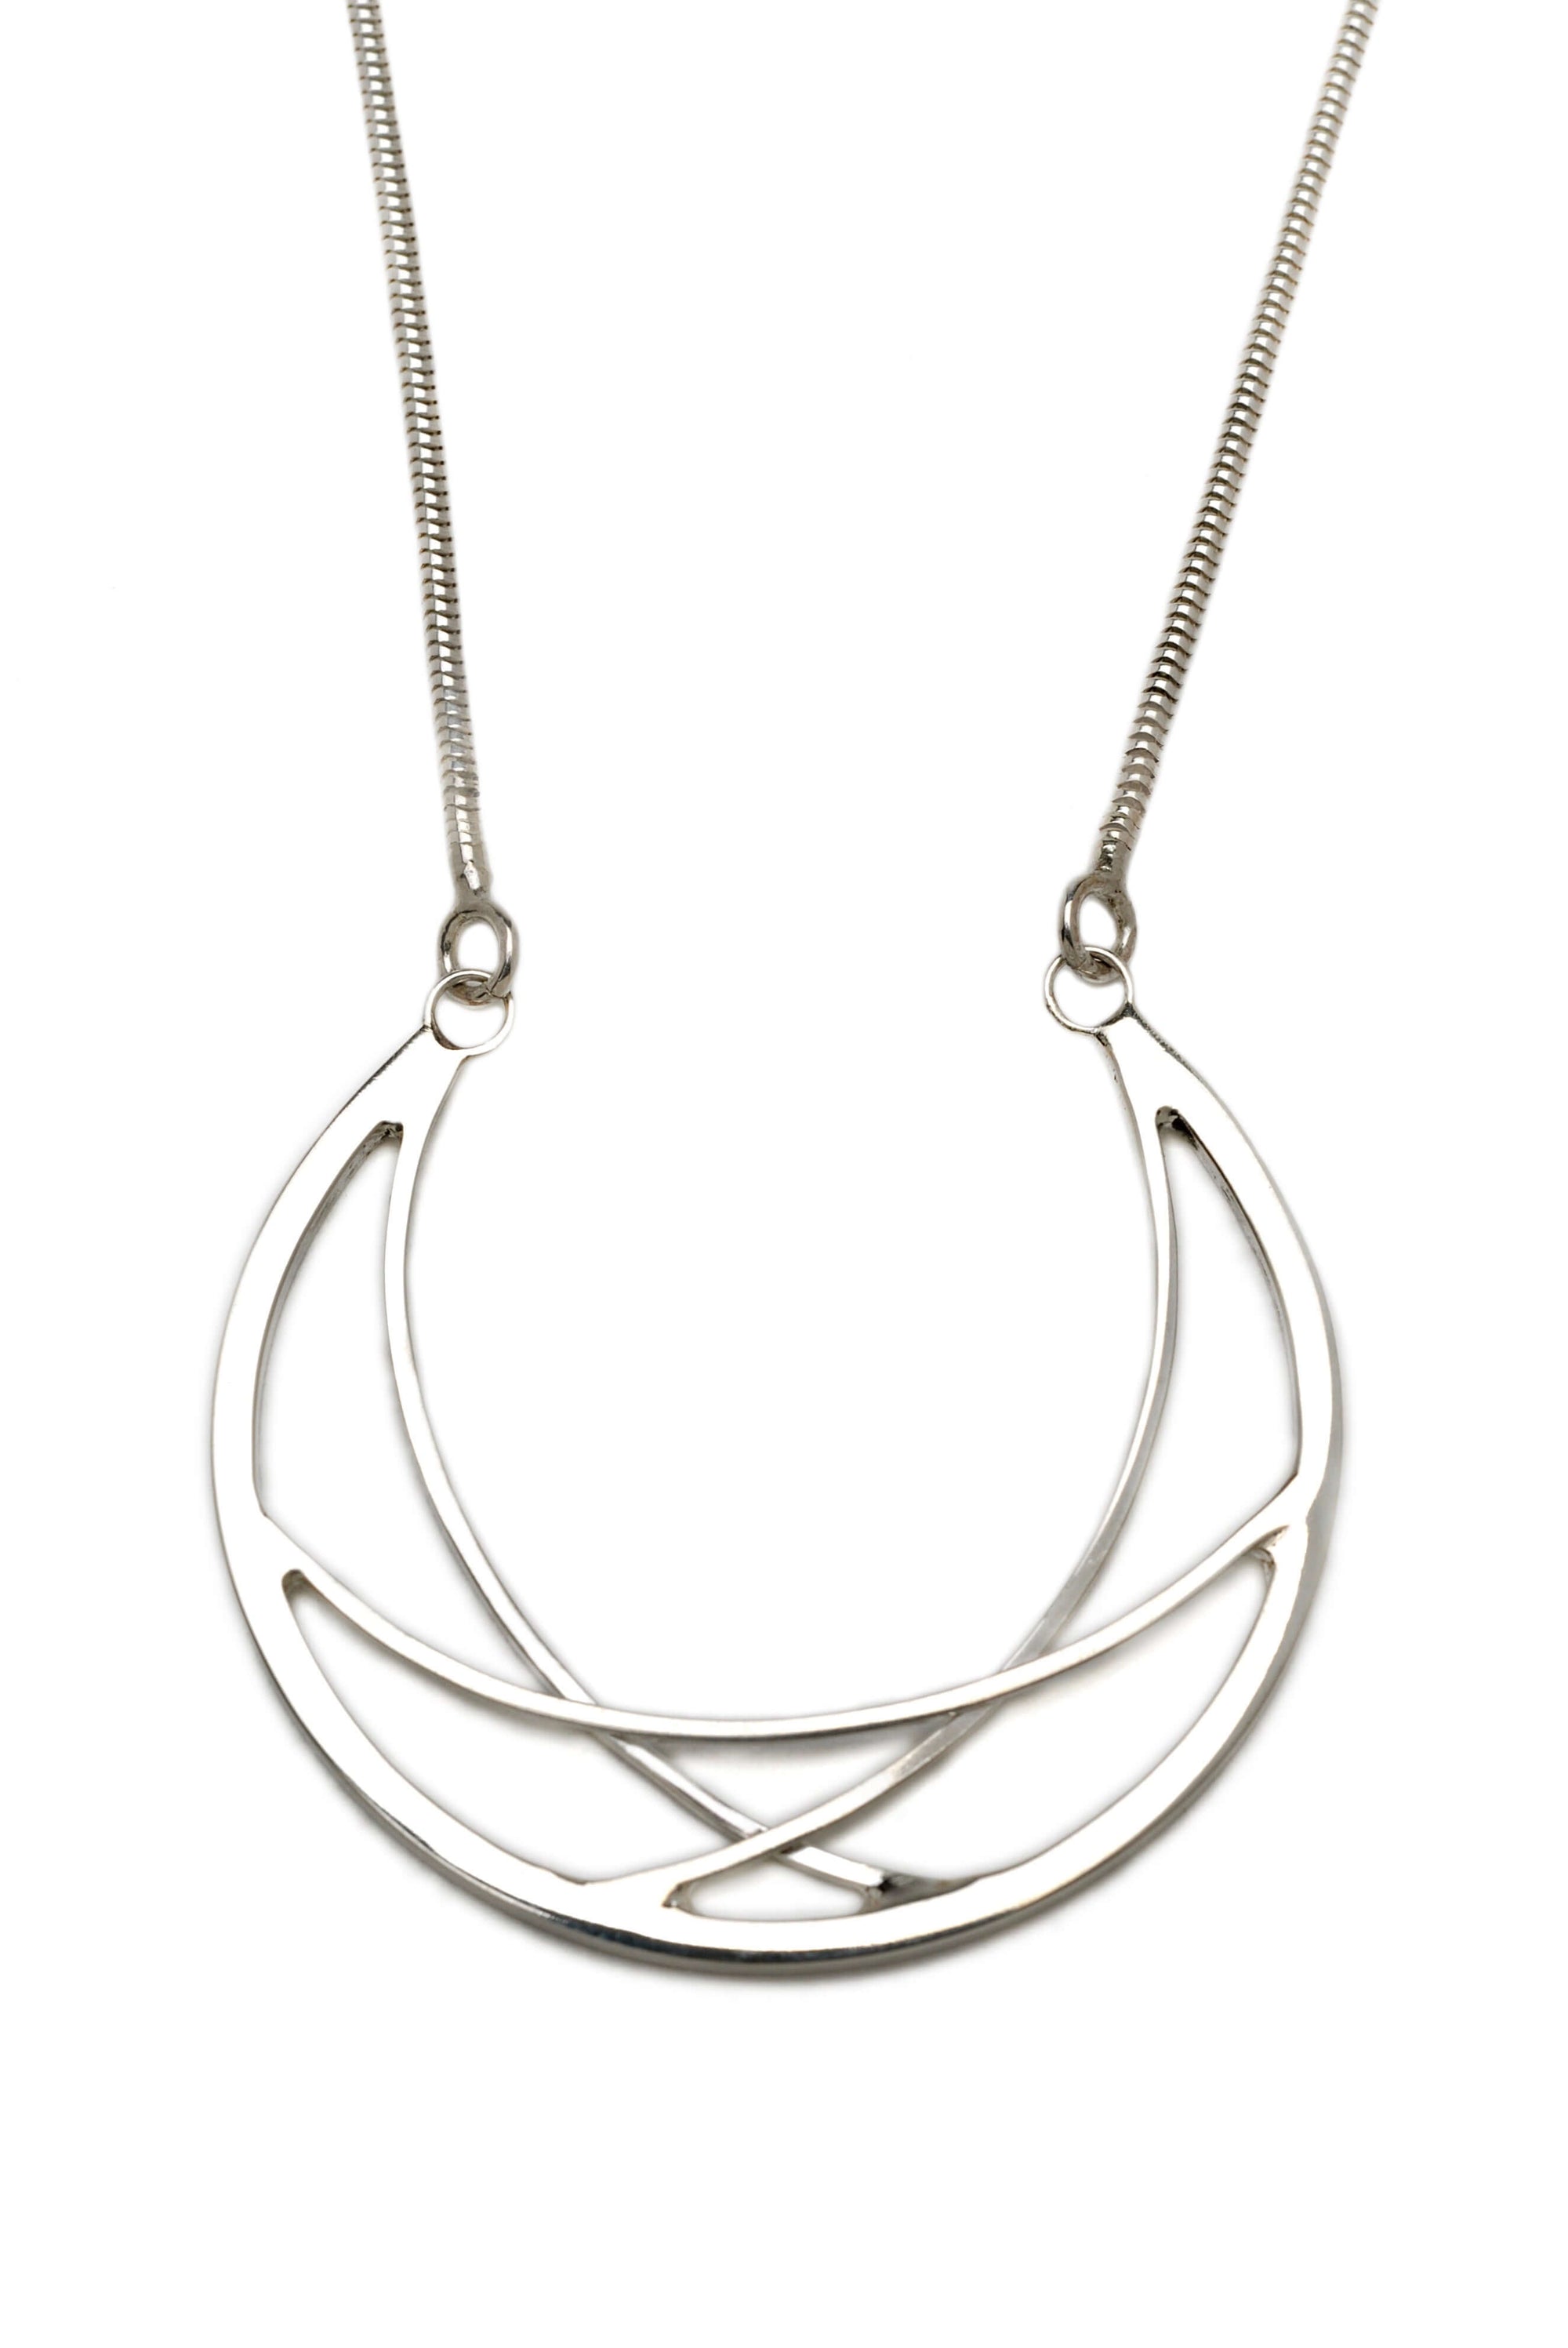 A large handmade sterling silver crescent necklace on a silver chain